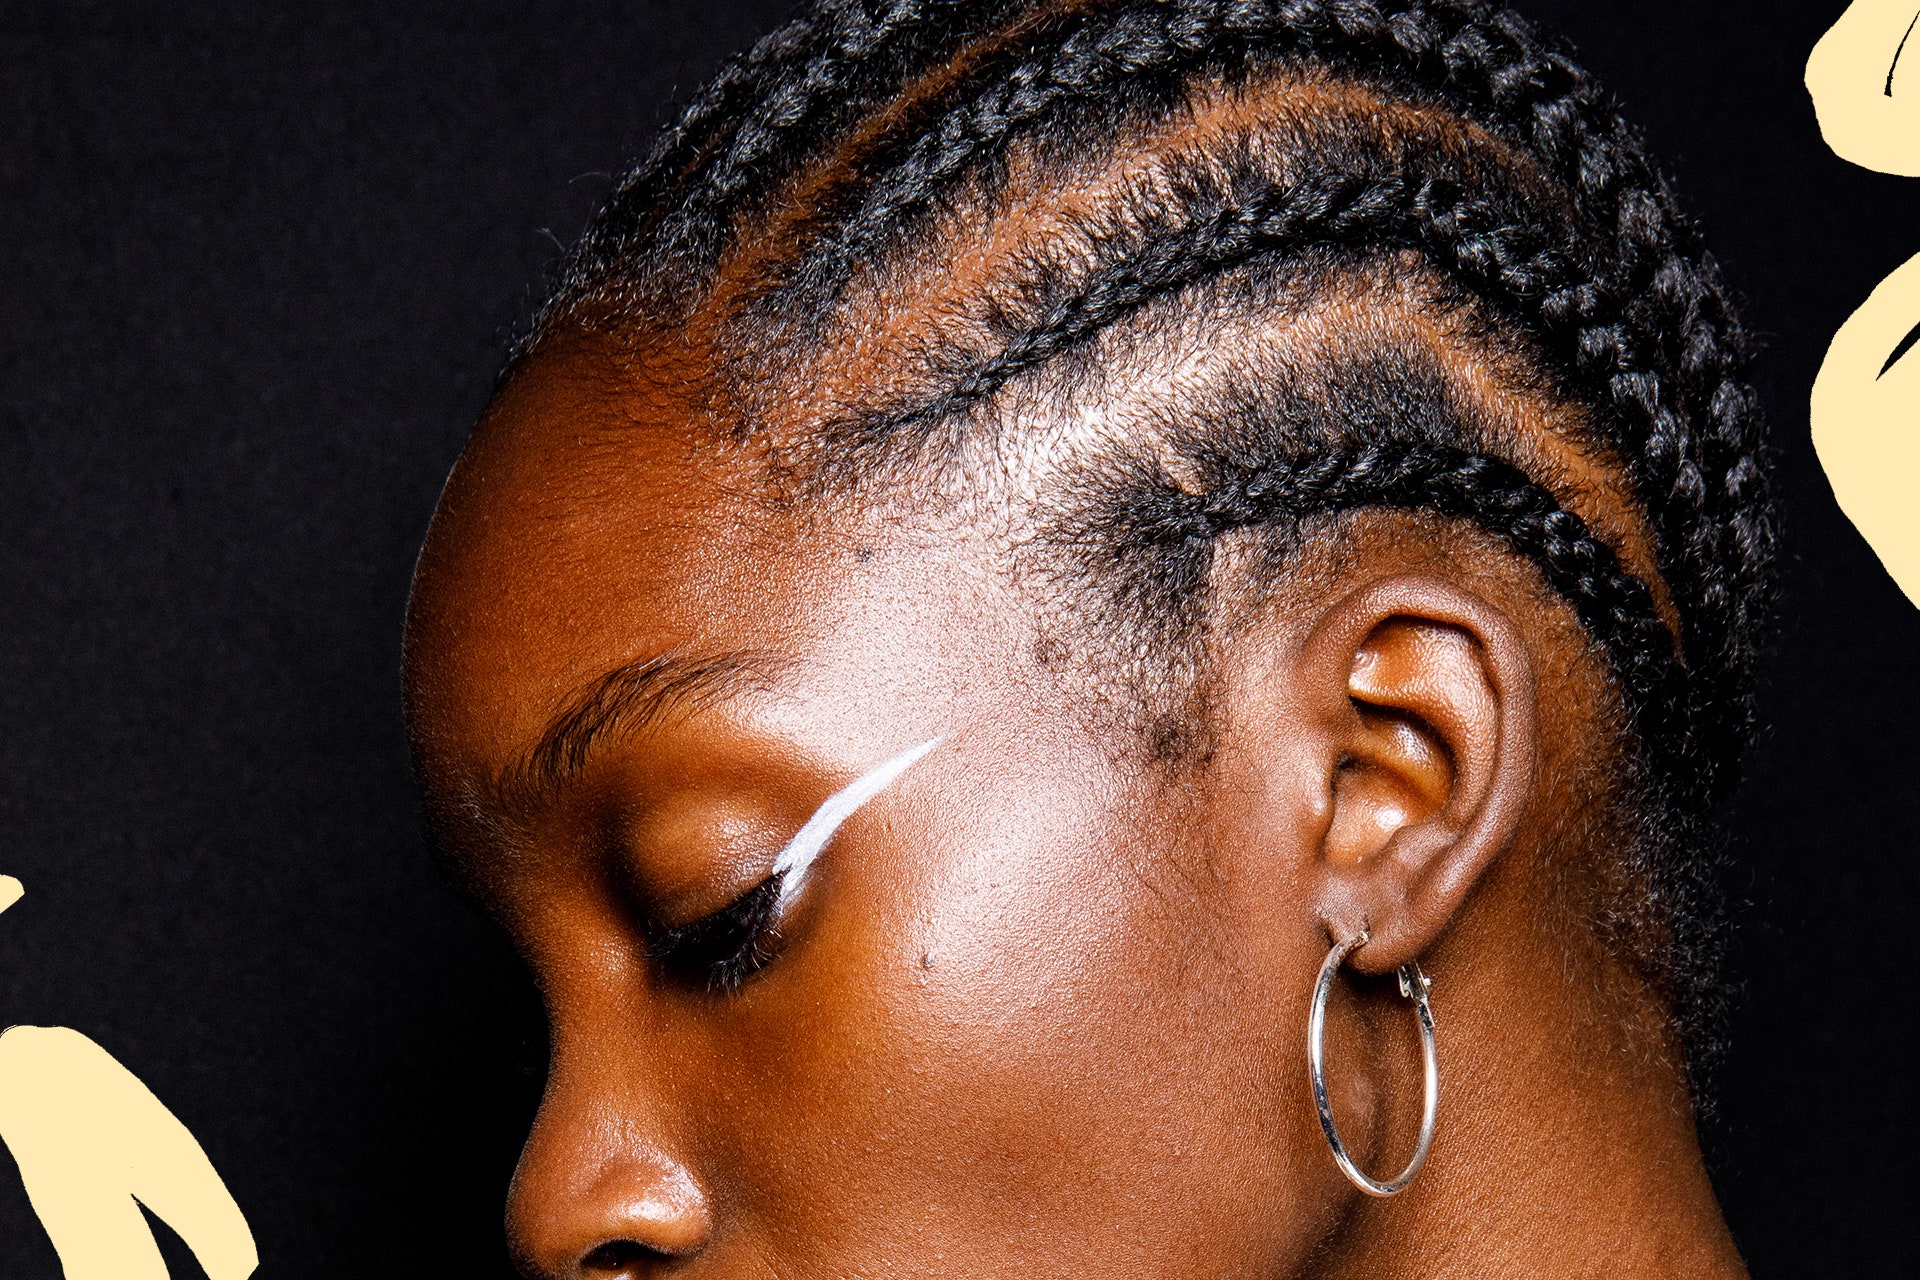 BOXBRAIDS 110122 GettyImages 1342344371 SQ